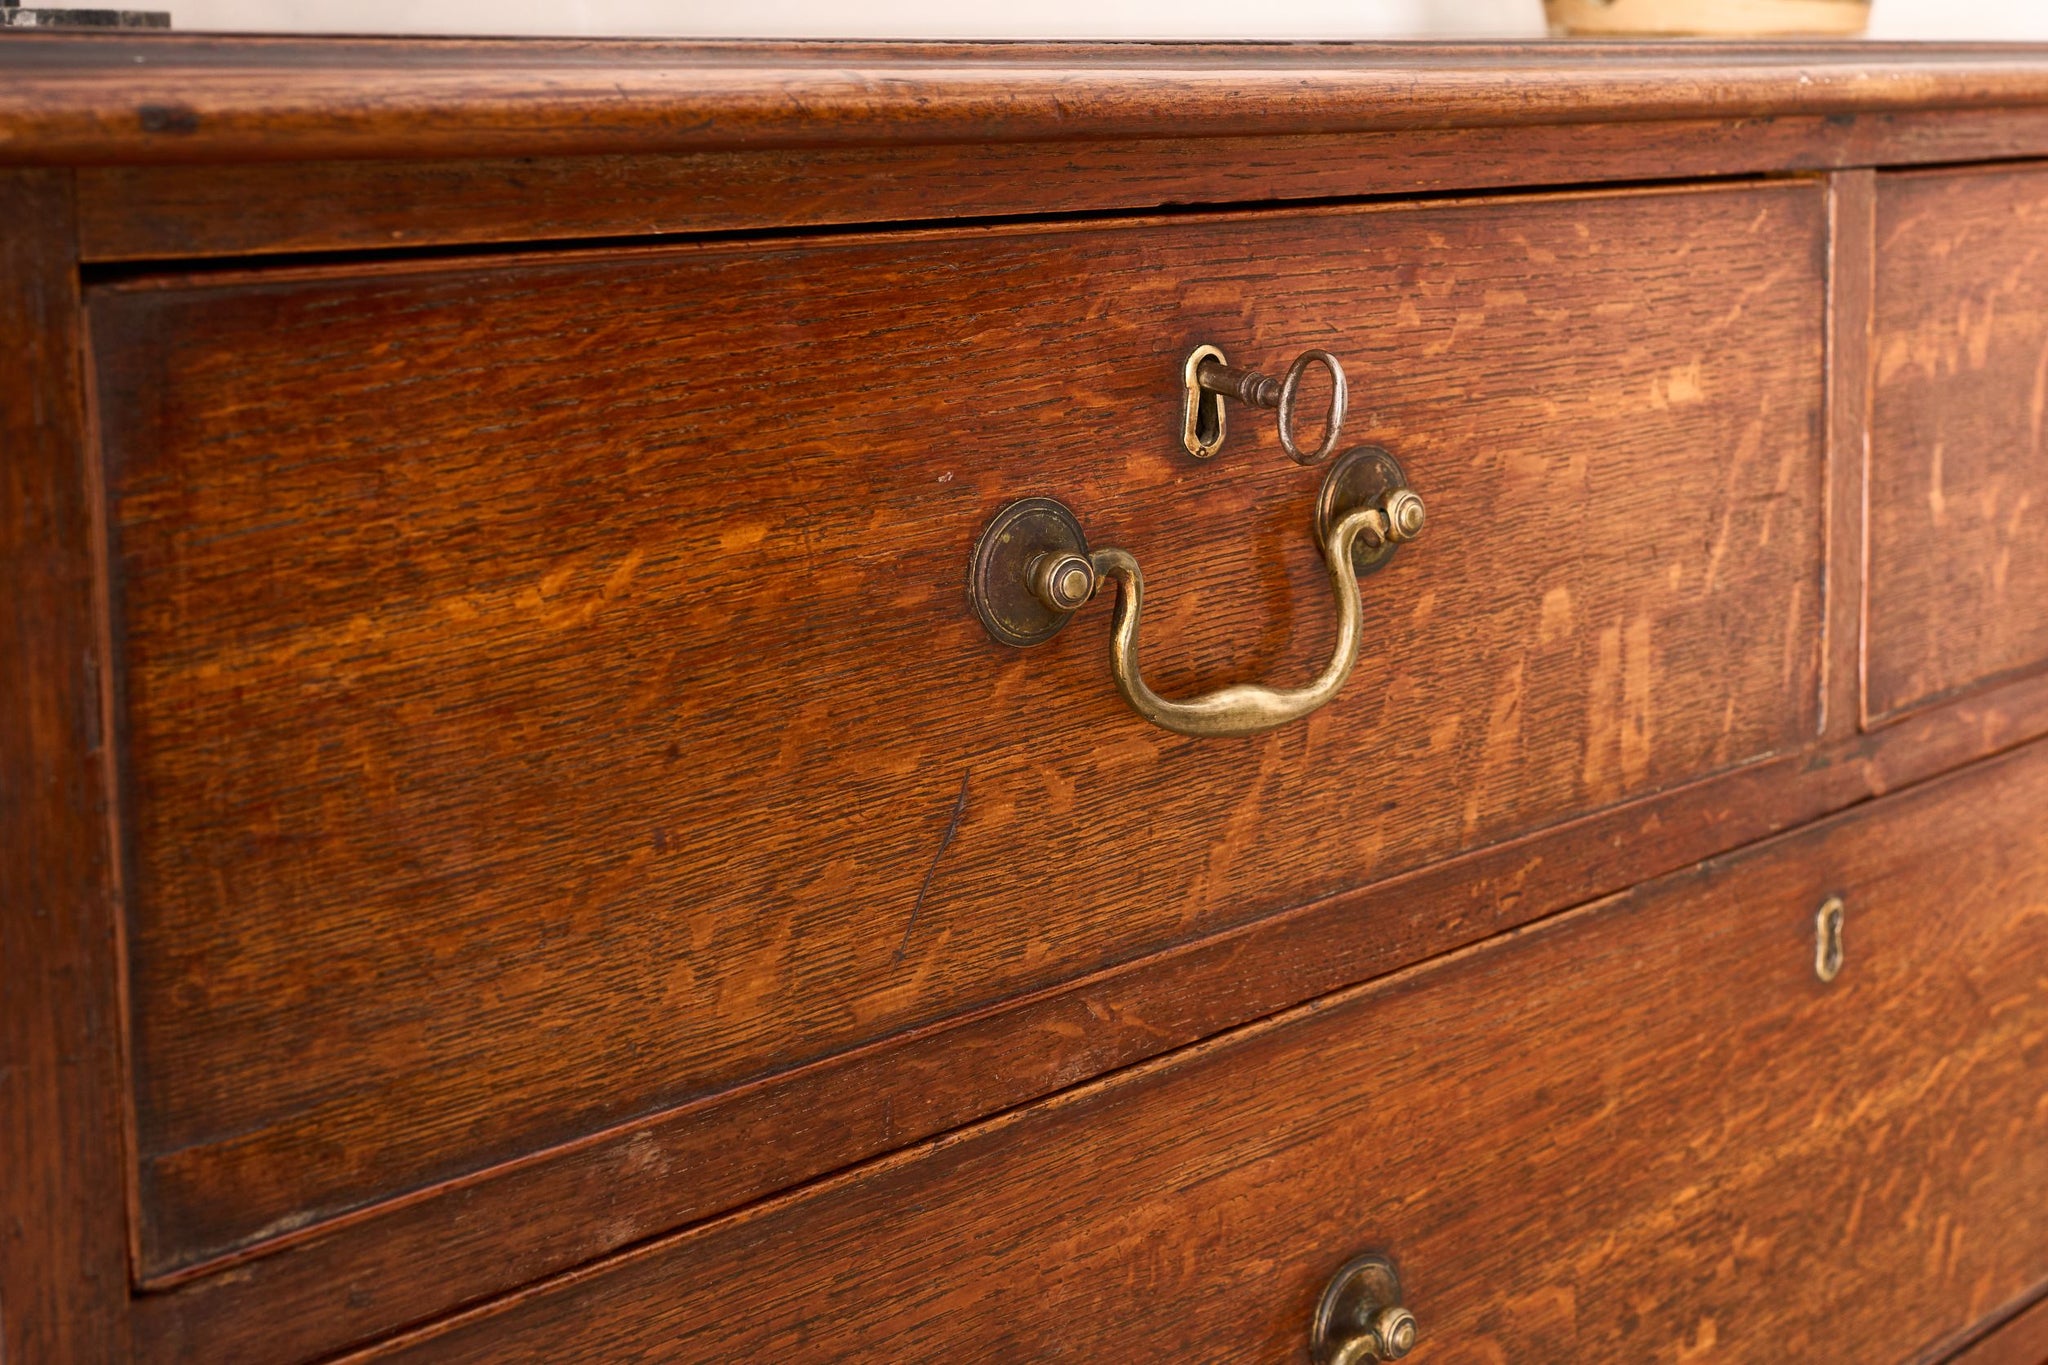 18th century Georgian oak chest of drawers with marquetry